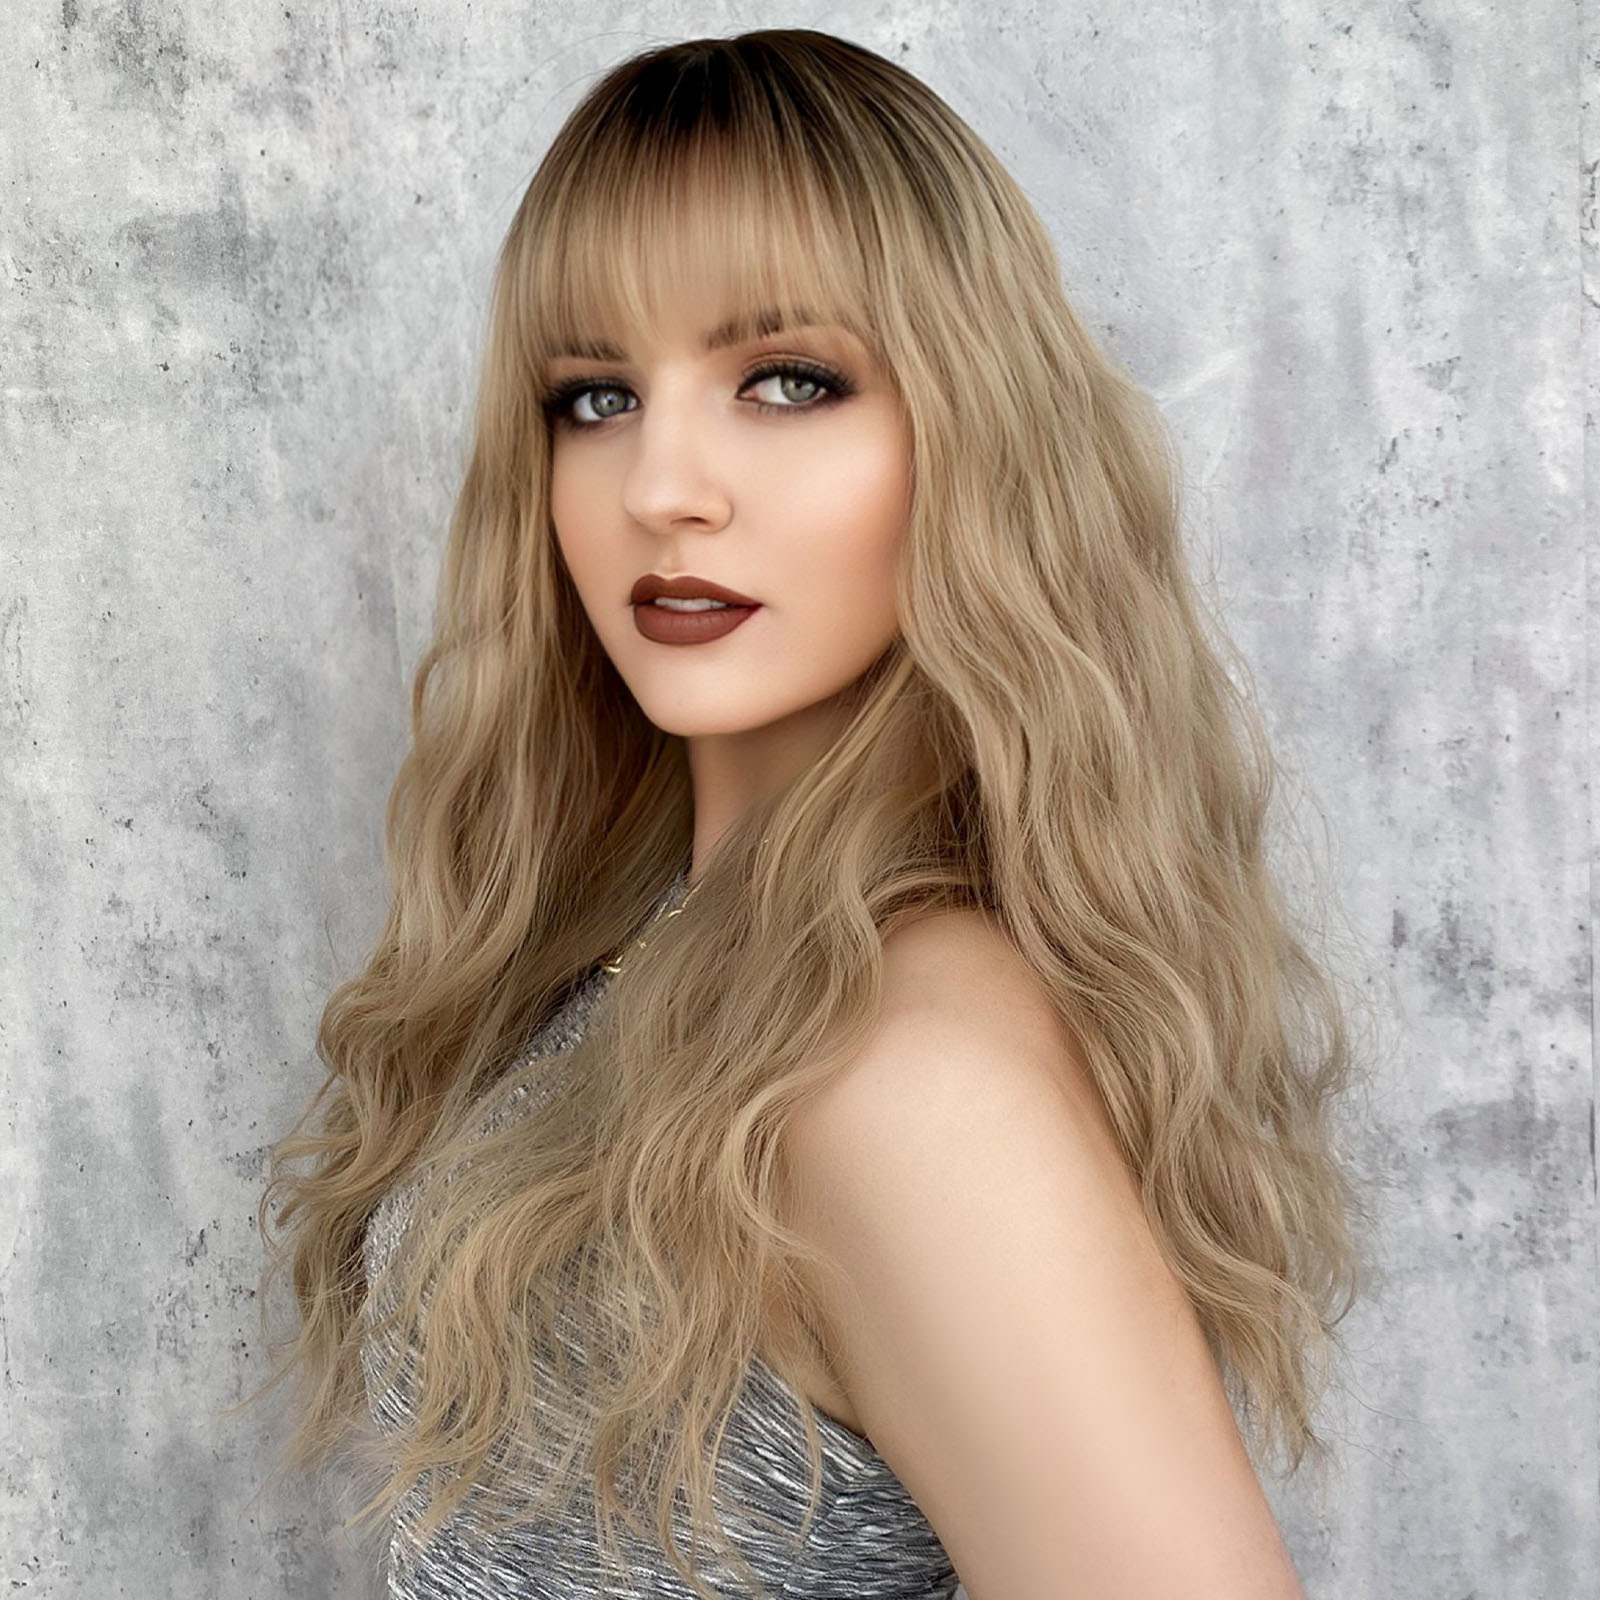 Image of a synthetic wig designed for women, featuring long wavy blonde hair set on a rose net for easy wear